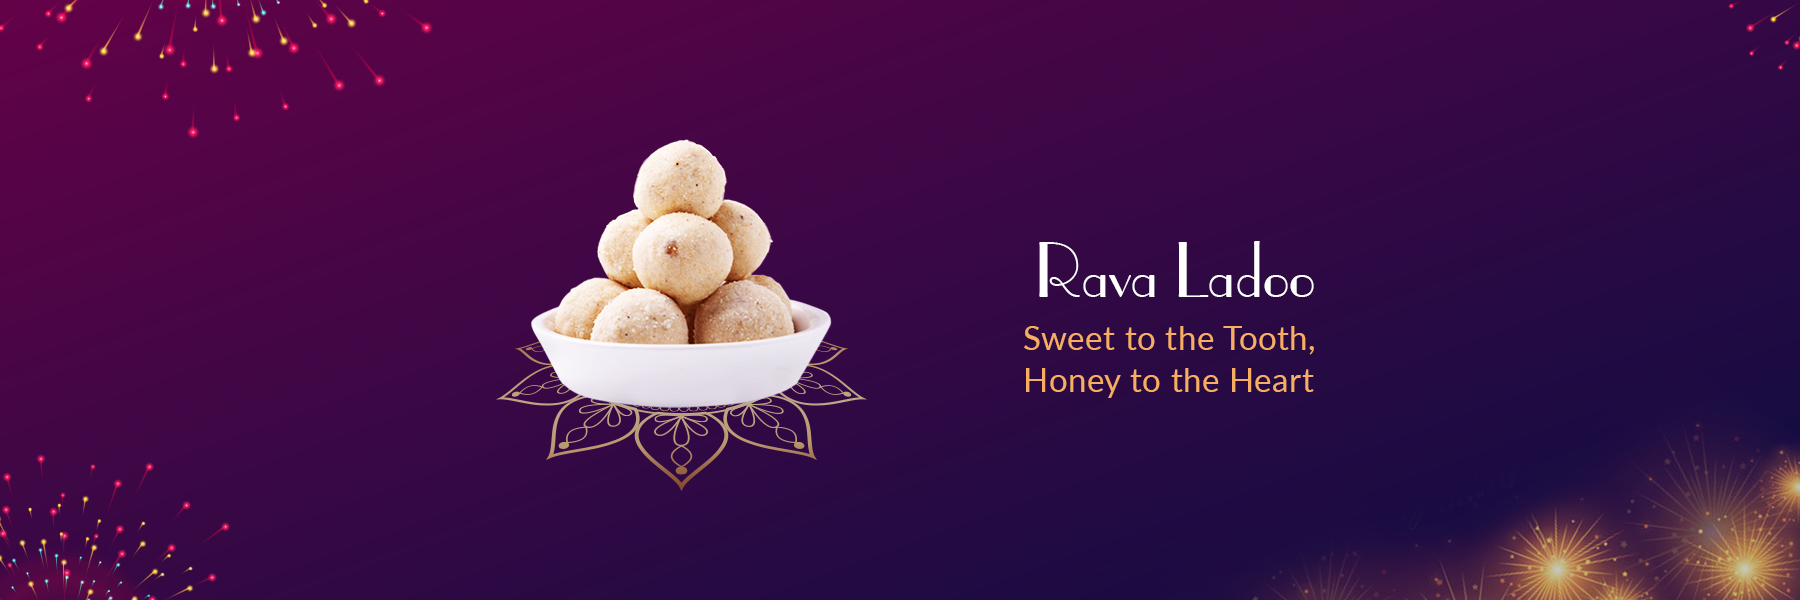 Rava Ladoo - Sweet to the Tooth, Honey to the Heart. FromIndia.com